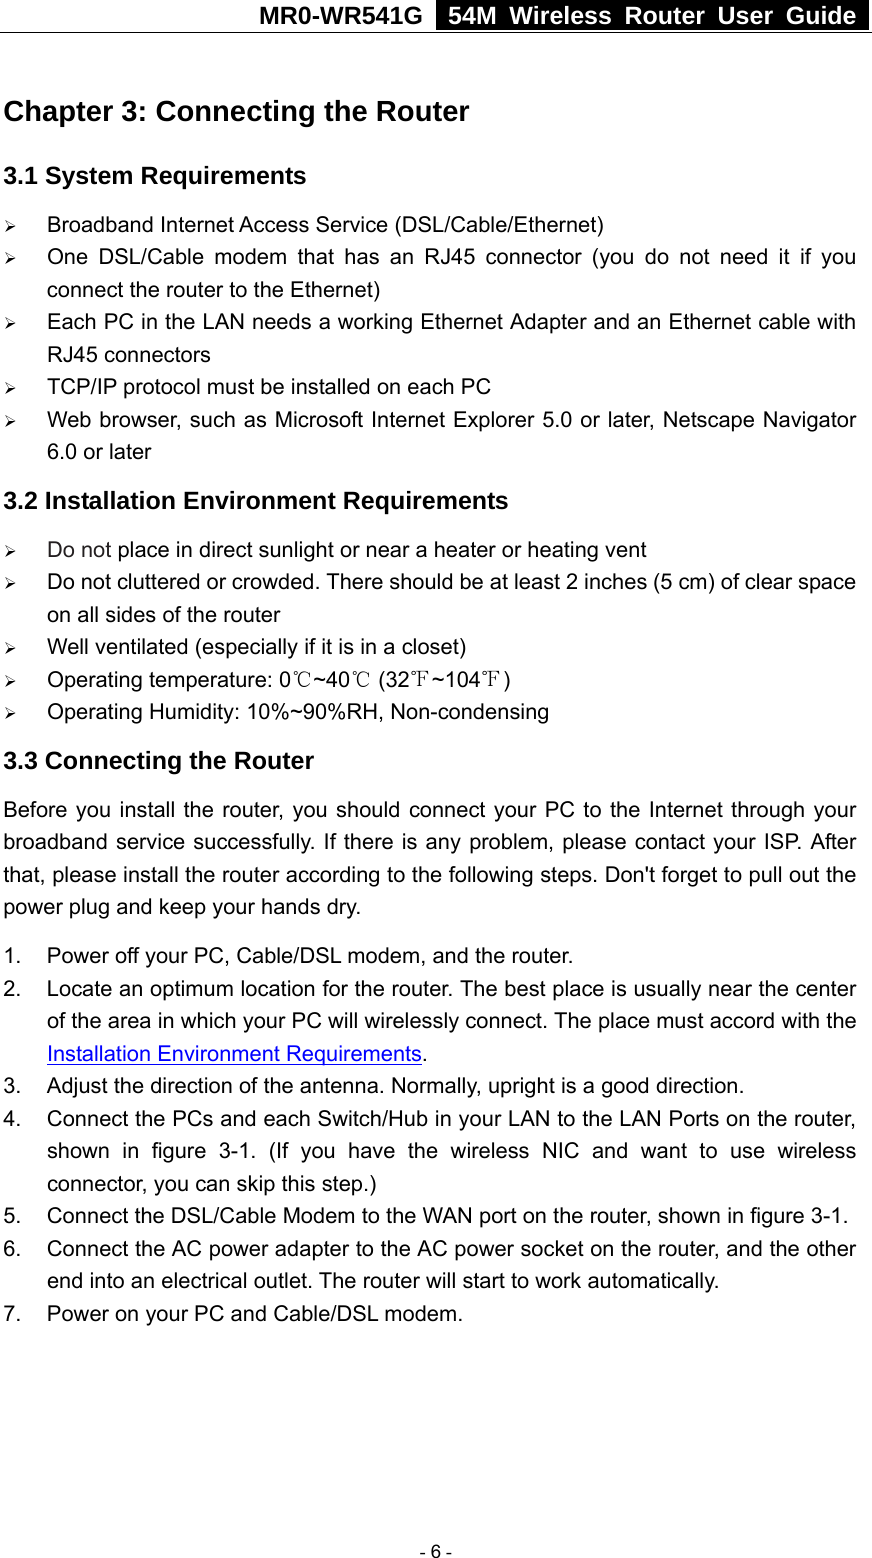 MR0-WR541G   54M Wireless Router User Guide  Chapter 3: Connecting the Router 3.1 System Requirements ¾ Broadband Internet Access Service (DSL/Cable/Ethernet) ¾ One DSL/Cable modem that has an RJ45 connector (you do not need it if you connect the router to the Ethernet) ¾ Each PC in the LAN needs a working Ethernet Adapter and an Ethernet cable with RJ45 connectors ¾ TCP/IP protocol must be installed on each PC ¾ Web browser, such as Microsoft Internet Explorer 5.0 or later, Netscape Navigator 6.0 or later 3.2 Installation Environment Requirements ¾ Do not place in direct sunlight or near a heater or heating vent ¾ Do not cluttered or crowded. There should be at least 2 inches (5 cm) of clear space on all sides of the router ¾ Well ventilated (especially if it is in a closet) ¾ Operating temperature: 0 ~40  (32 ~104 )℃℃℉ ℉ ¾ Operating Humidity: 10%~90%RH, Non-condensing 3.3 Connecting the Router Before you install the router, you should connect your PC to the Internet through your broadband service successfully. If there is any problem, please contact your ISP. After that, please install the router according to the following steps. Don&apos;t forget to pull out the power plug and keep your hands dry. 1.  Power off your PC, Cable/DSL modem, and the router. 2.  Locate an optimum location for the router. The best place is usually near the center of the area in which your PC will wirelessly connect. The place must accord with the Installation Environment Requirements. 3.  Adjust the direction of the antenna. Normally, upright is a good direction. 4.  Connect the PCs and each Switch/Hub in your LAN to the LAN Ports on the router, shown in figure 3-1. (If you have the wireless NIC and want to use wireless connector, you can skip this step.) 5. Connect the DSL/Cable Modem to the WAN port on the router, shown in figure 3-1. 6.  Connect the AC power adapter to the AC power socket on the router, and the other end into an electrical outlet. The router will start to work automatically. 7.  Power on your PC and Cable/DSL modem.   - 6 - 